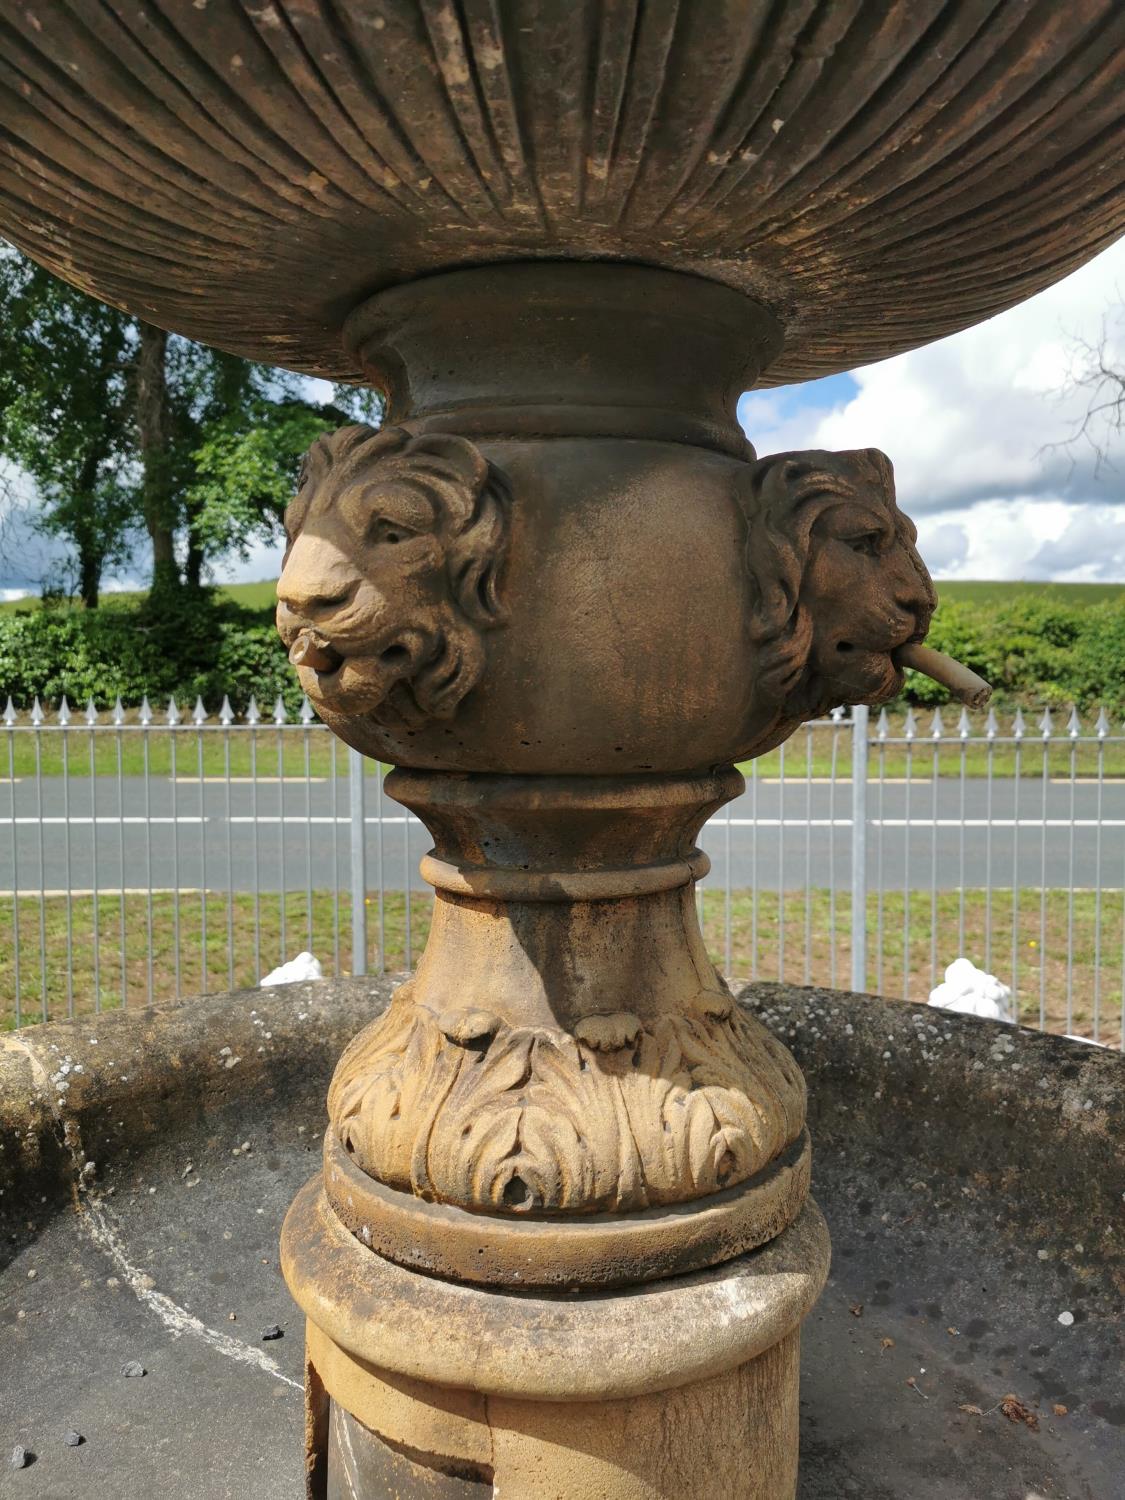 Exceptional three tiered moulded stone French water foutain with surround decorated with shells - Image 4 of 7